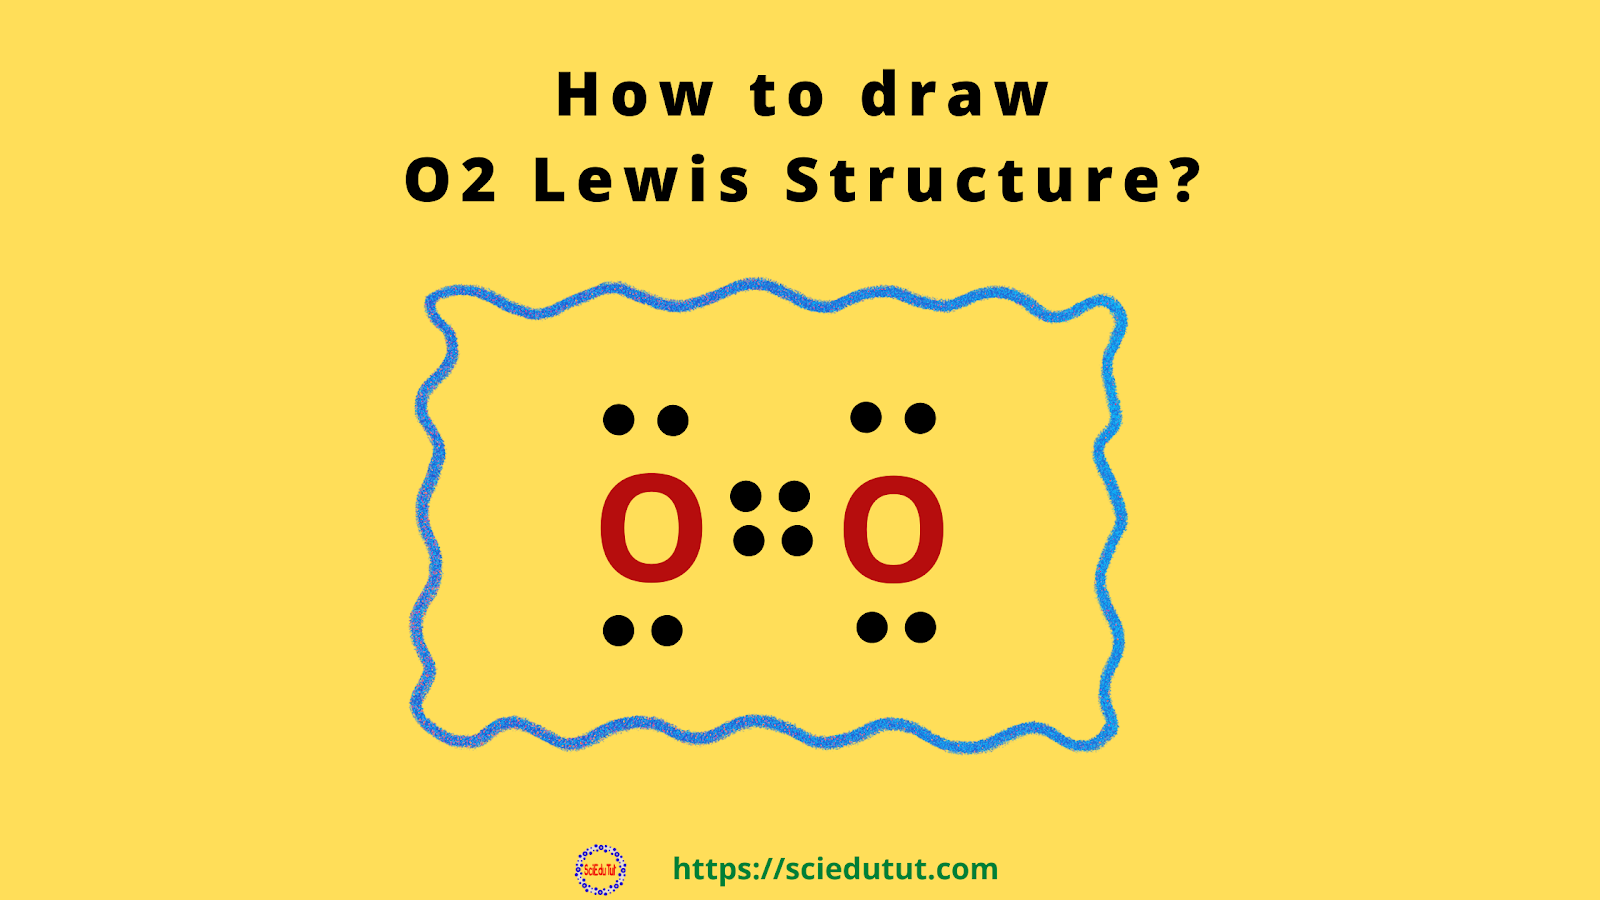 How to Draw O2 Lewis Structure?